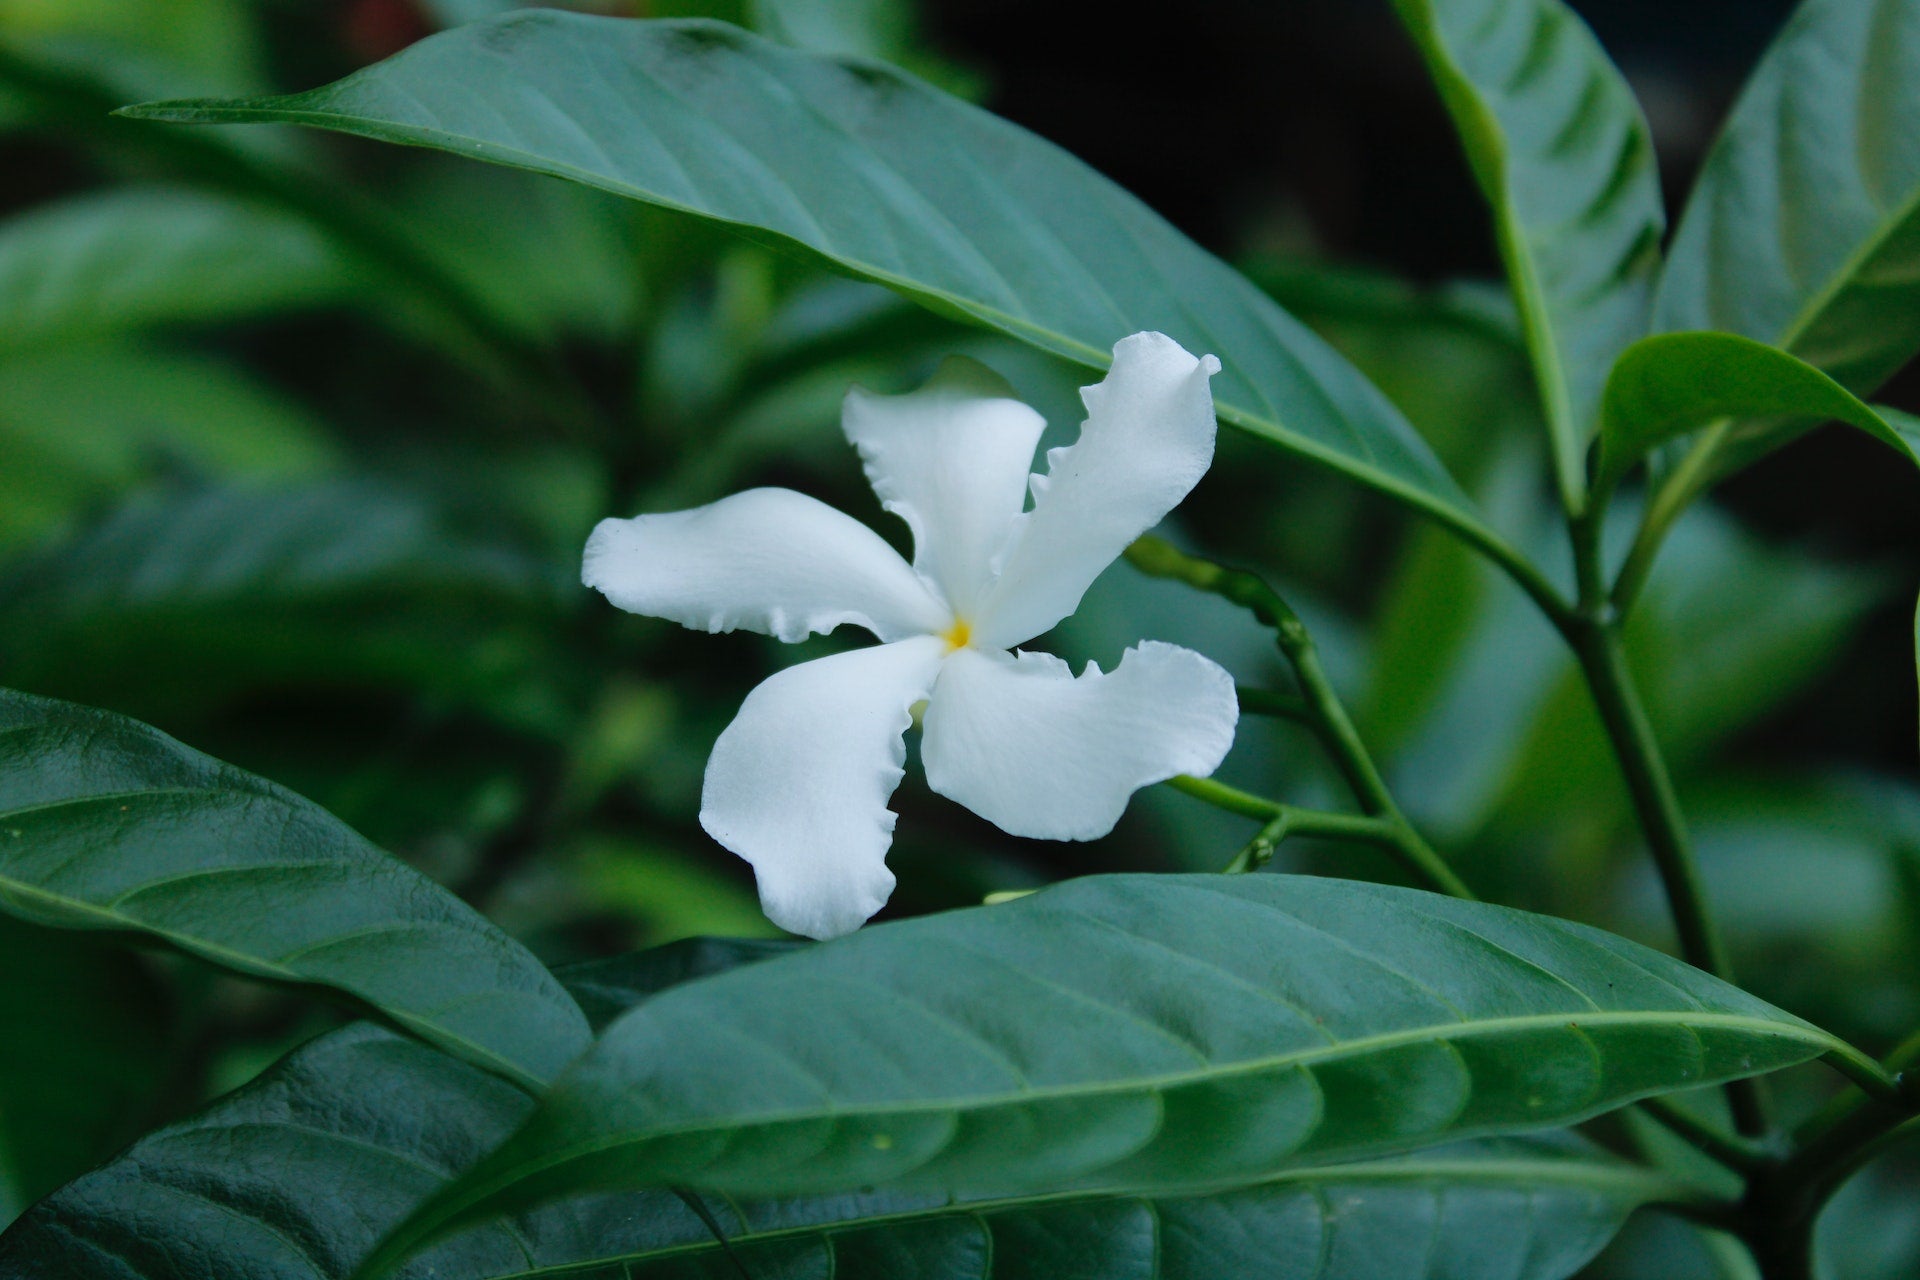 A close-up photo of a white jasmine flower with delicate petals and a yellow centre.